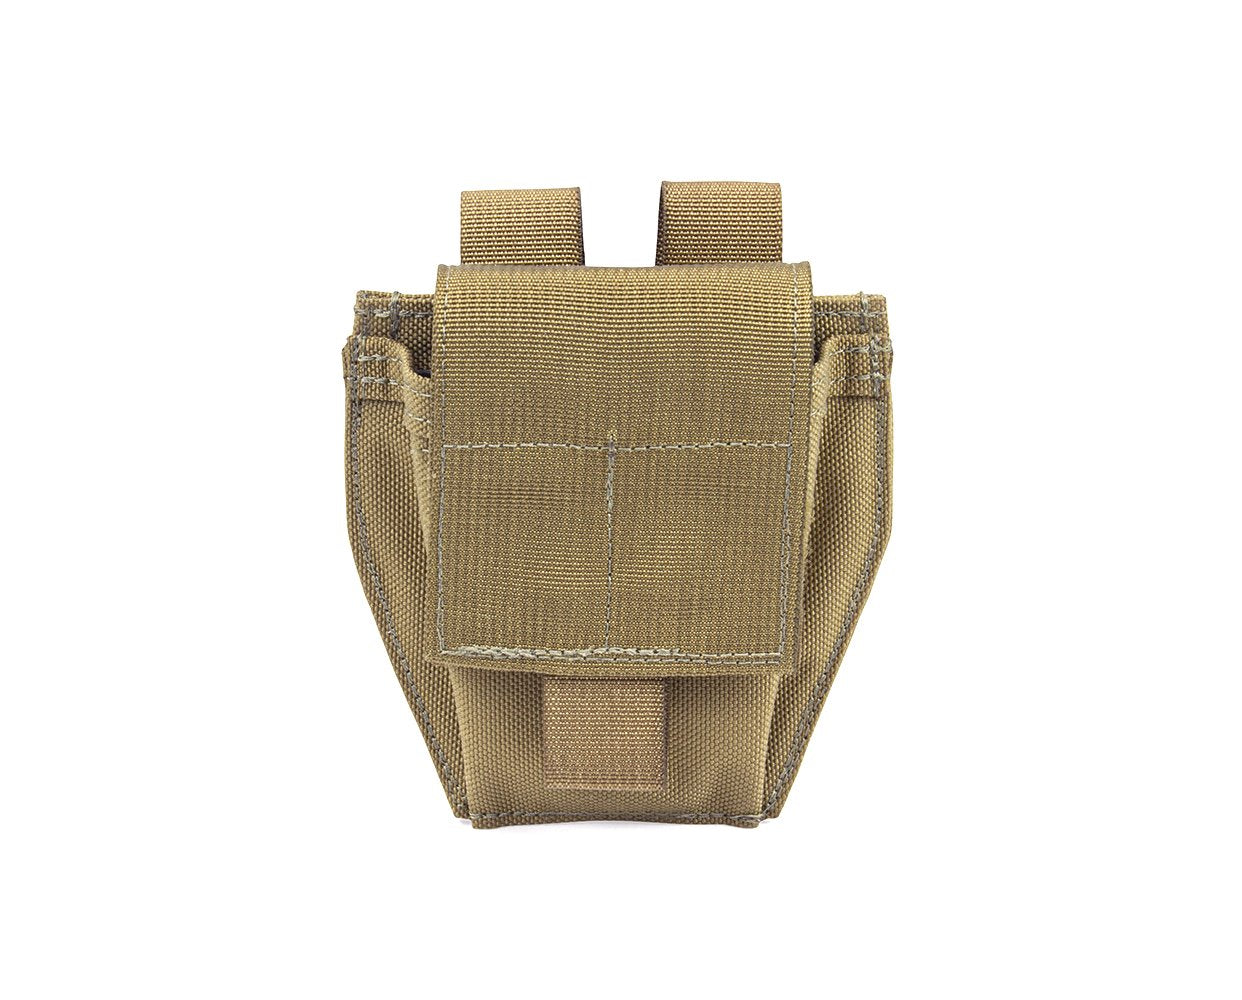 Olive green Elite Survival Systems MOLLE Cuff Pouches isolated on a white background.